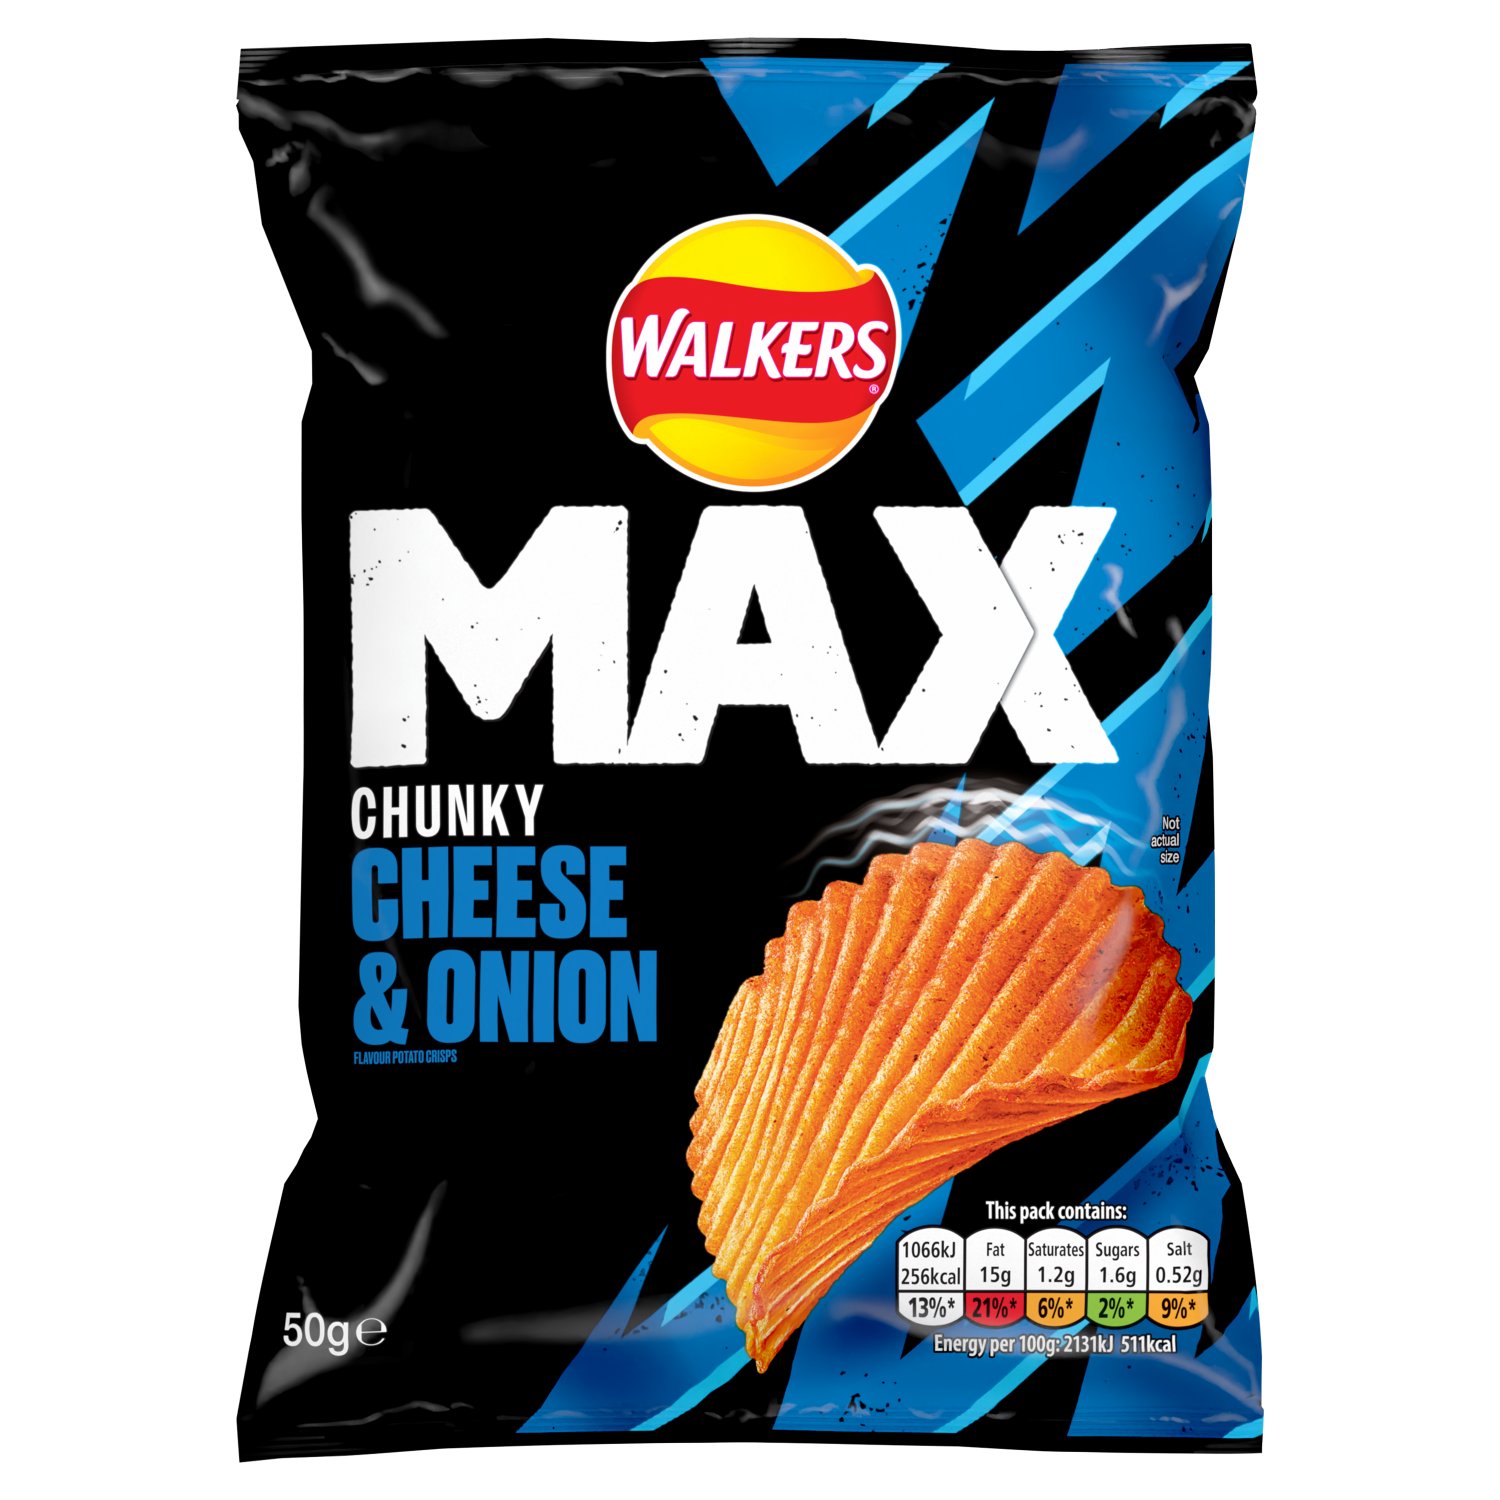 Walkers Max Chunky Cheese & Onion Crisps (50 g)